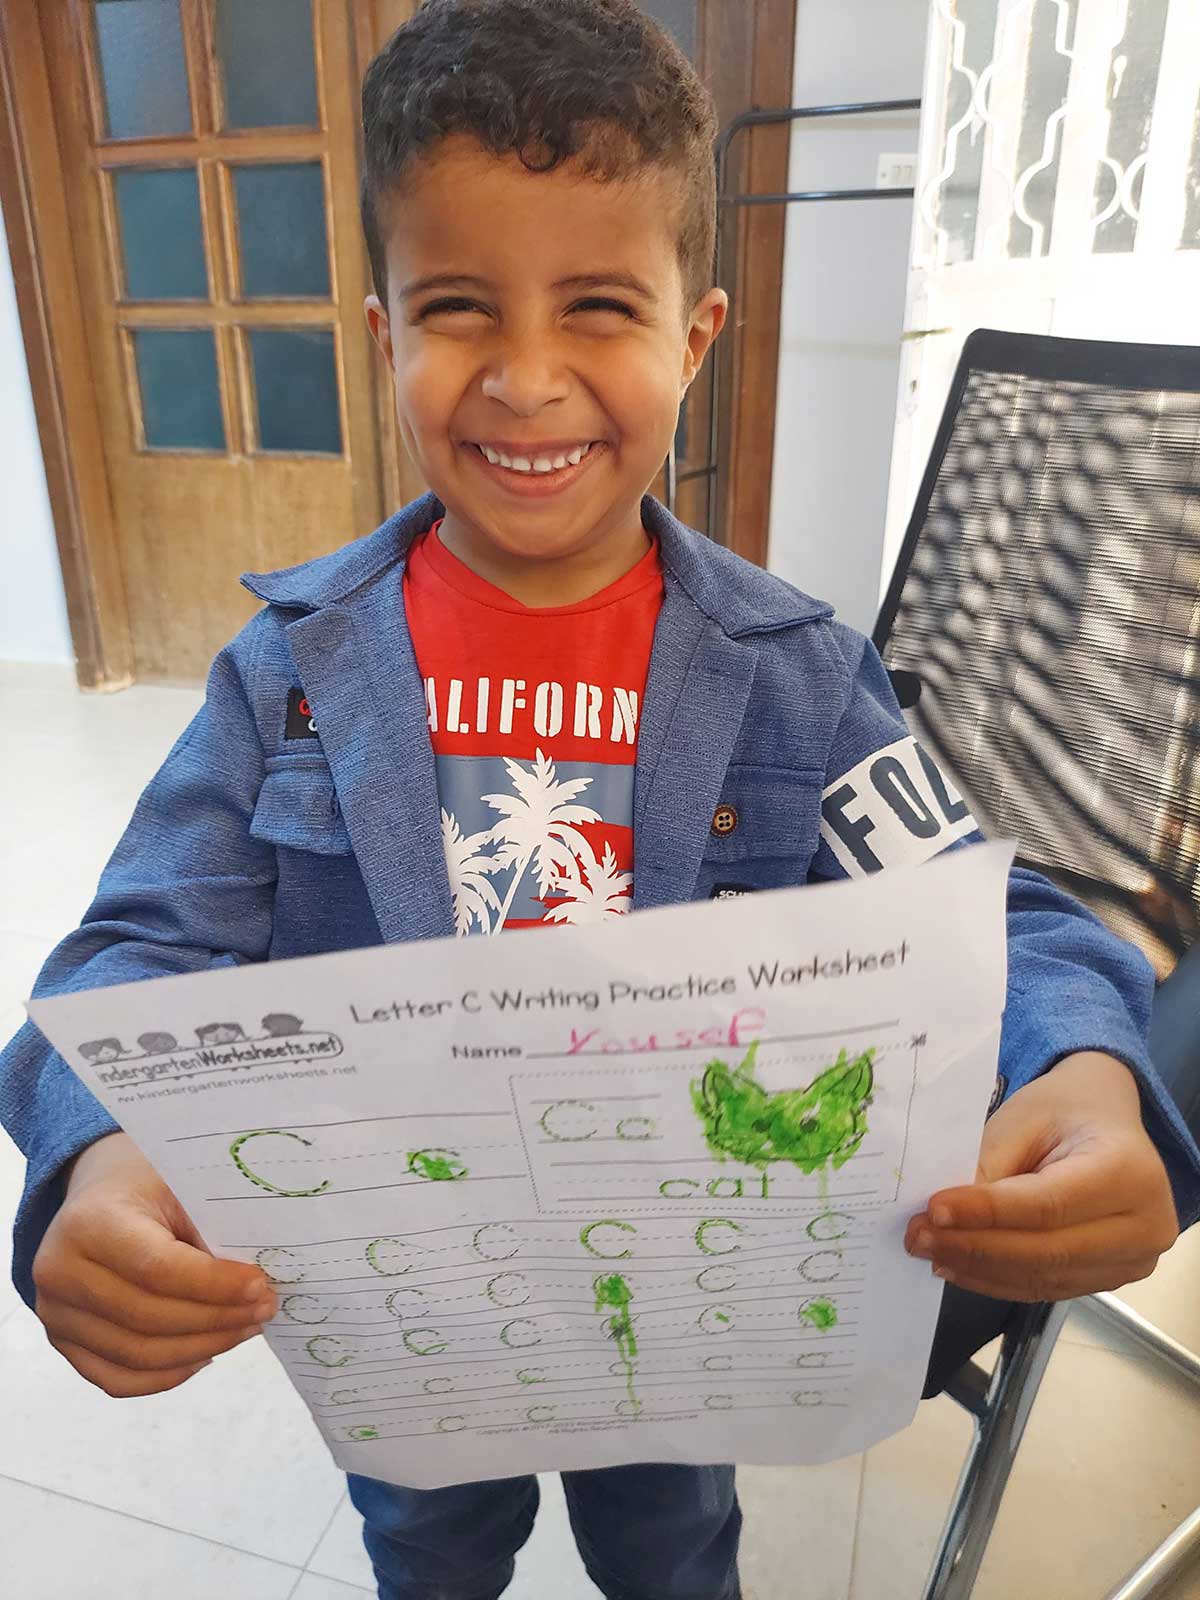 A boy student holding the English letter he created with his newfound skills.